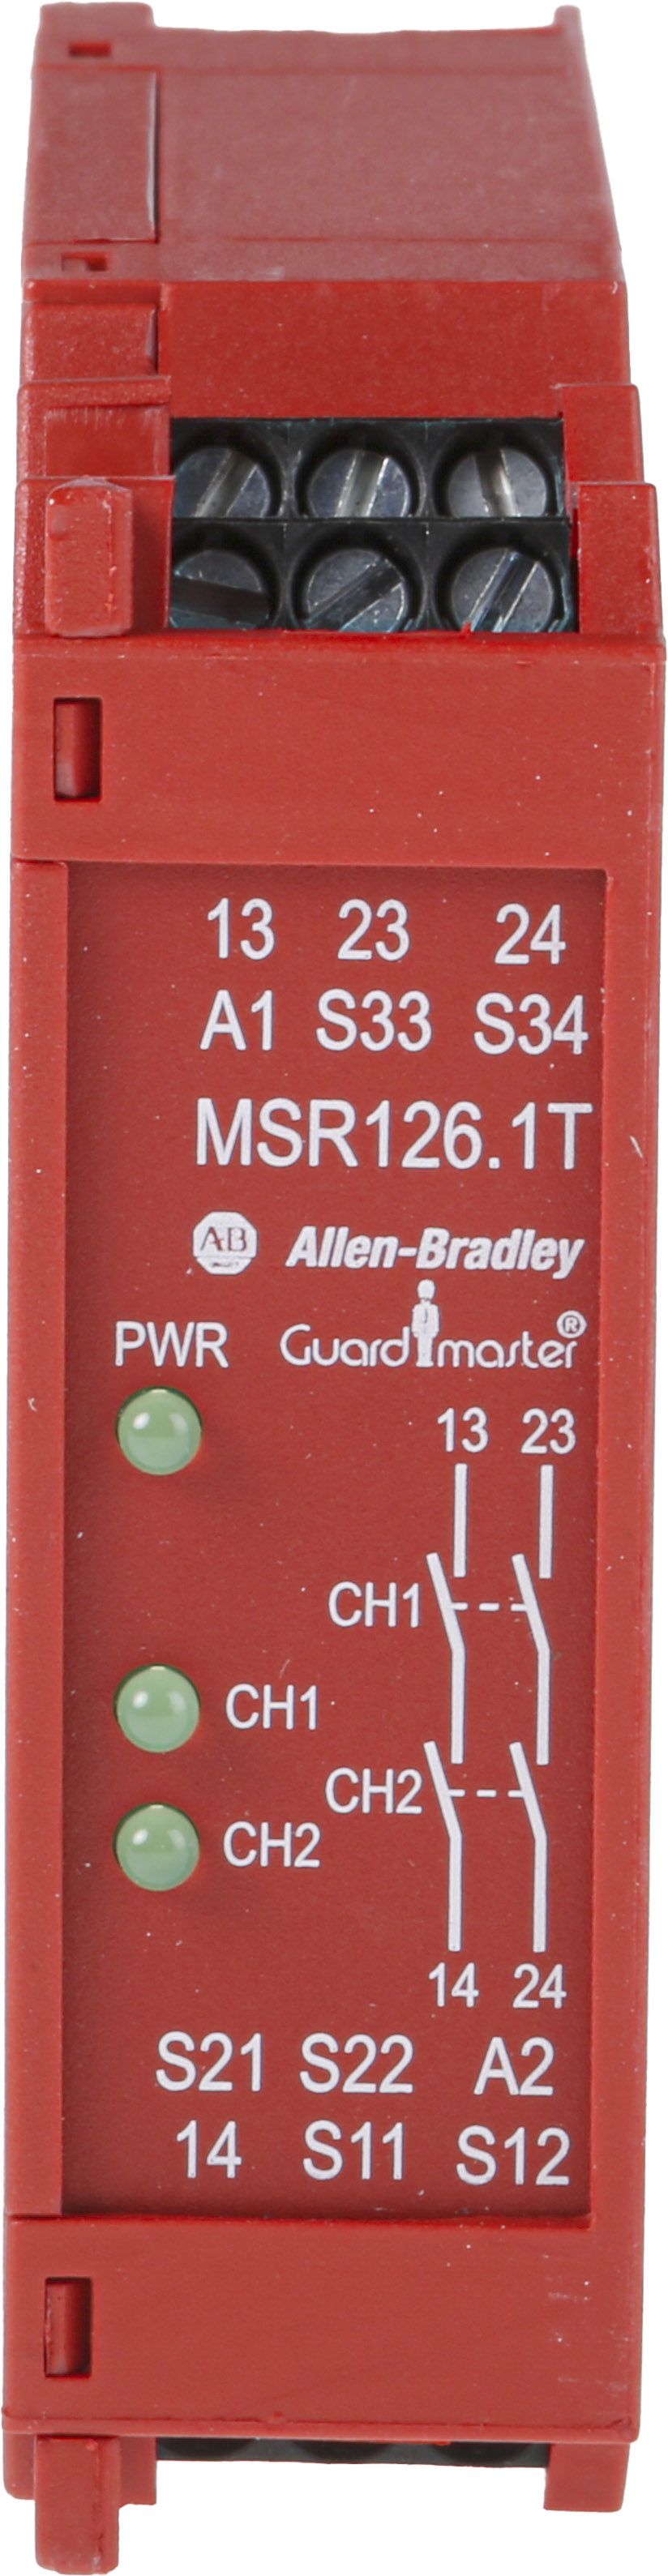 Rockwell Automation MSR126.1T Series Dual-Channel Light Beam/Curtain, Safety Switch/Interlock Safety Relay, 24V ac/dc,